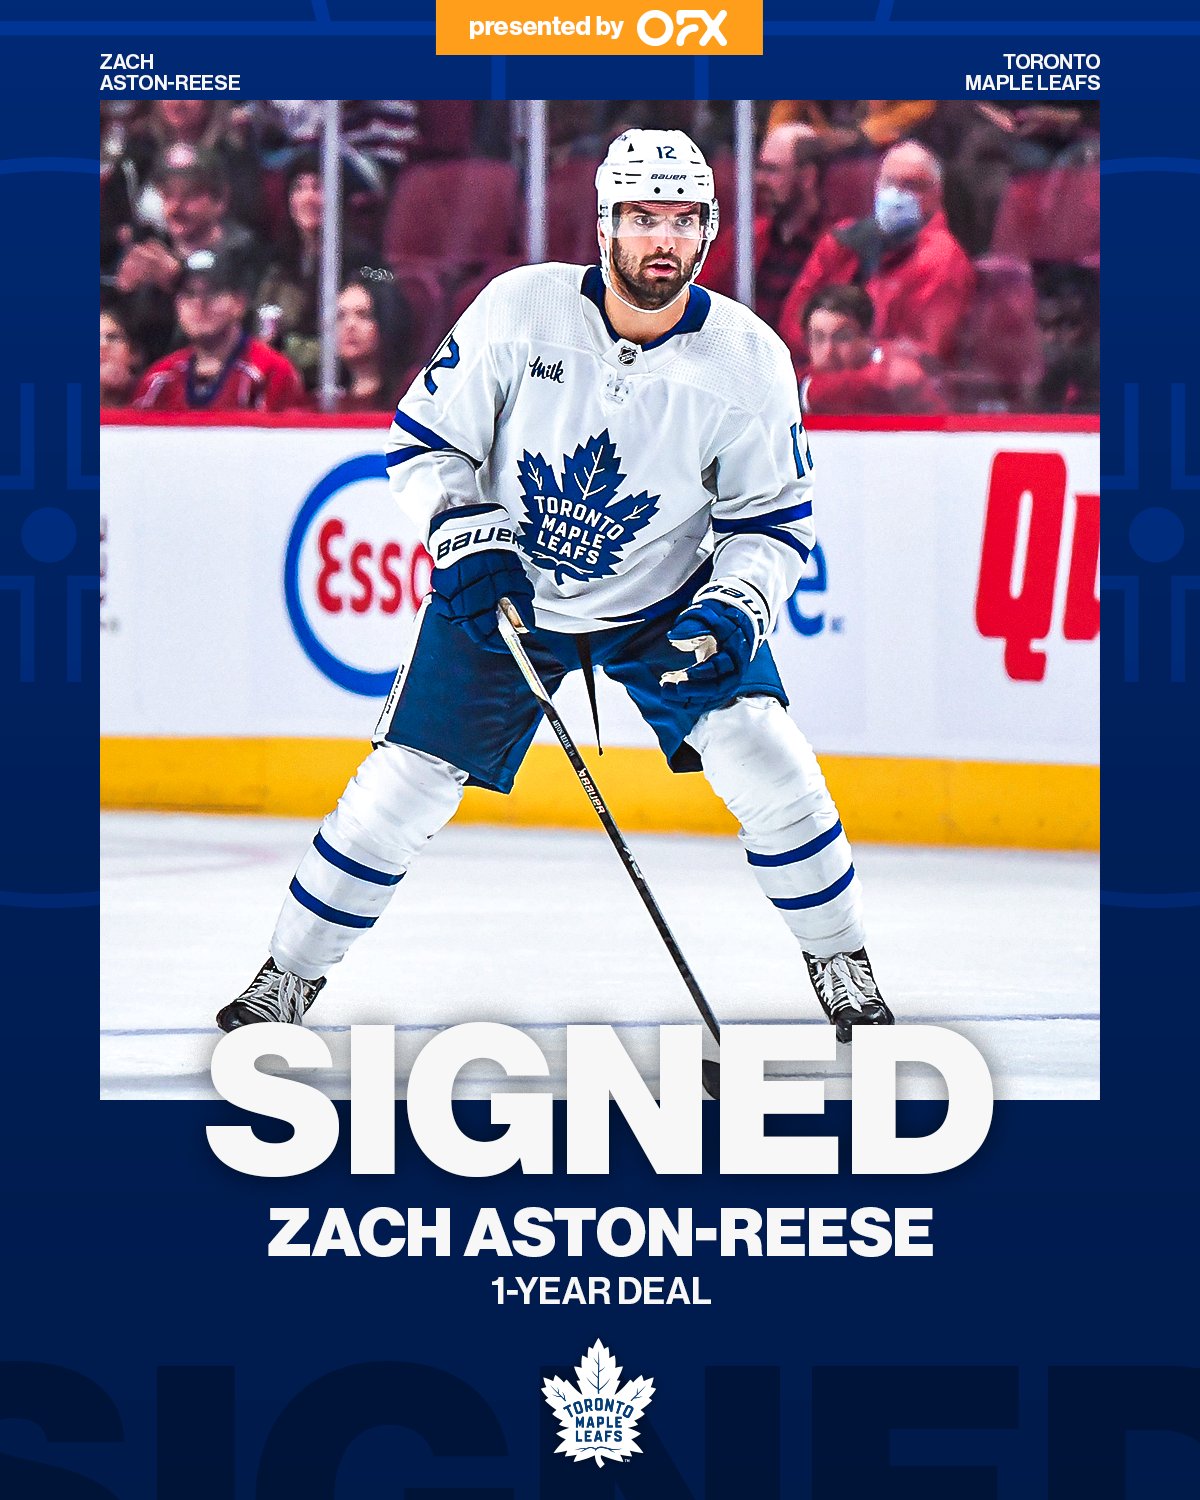 NHL on Twitter: "The @MapleLeafs have inked Zach Aston-Reese to a one-year  contract! ✍ https://t.co/P7ruEinr0R" / Twitter